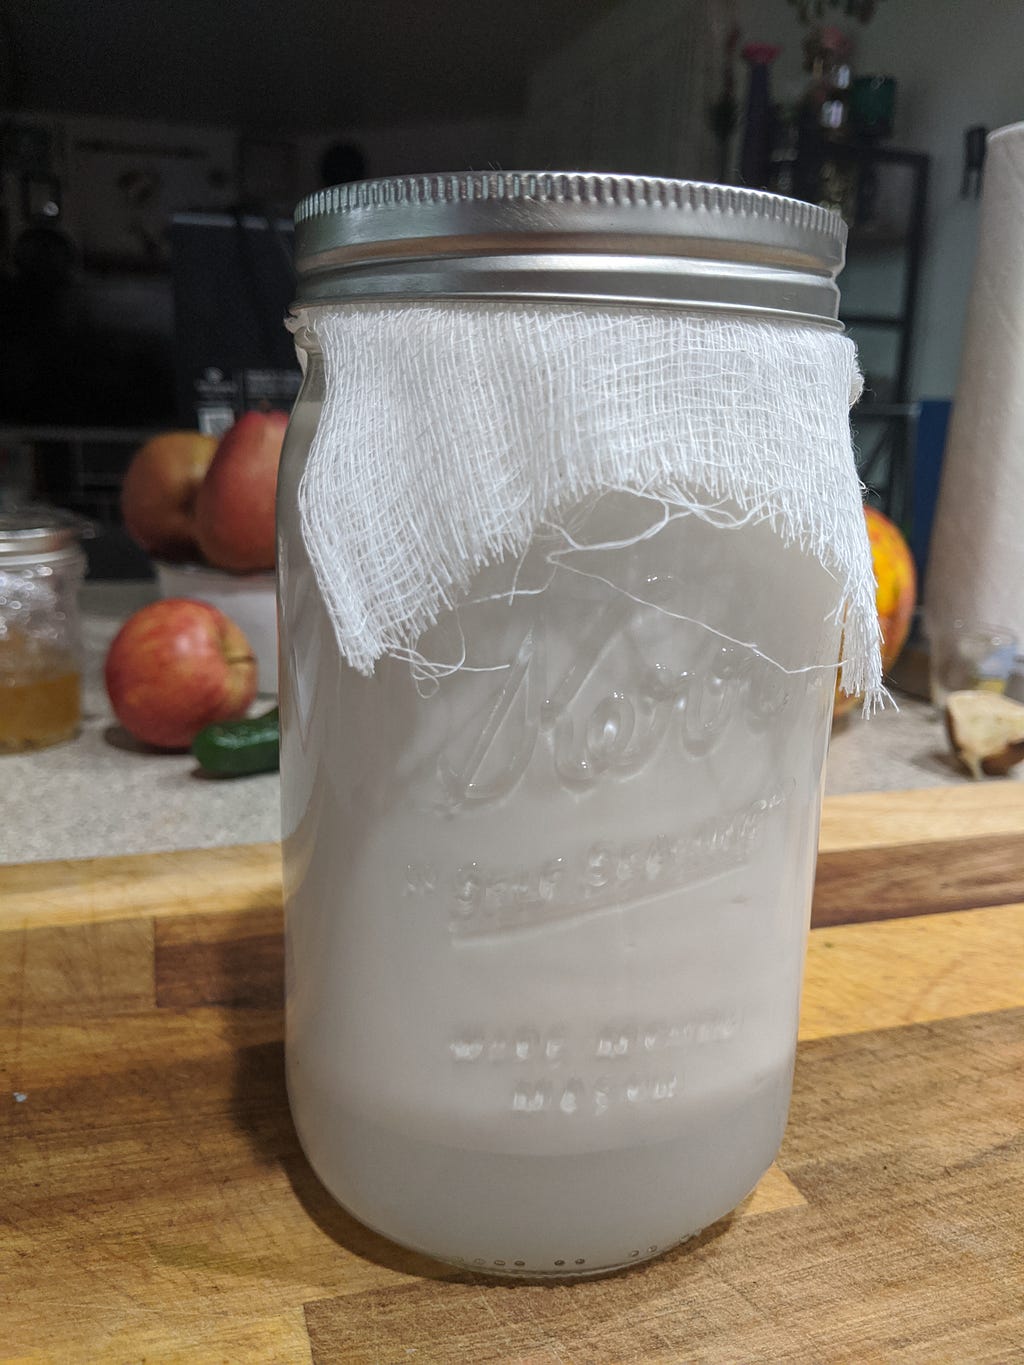 A jar of fermented coconut milk becoming yogurt with a thick, white curd floating in milky liquid whey.